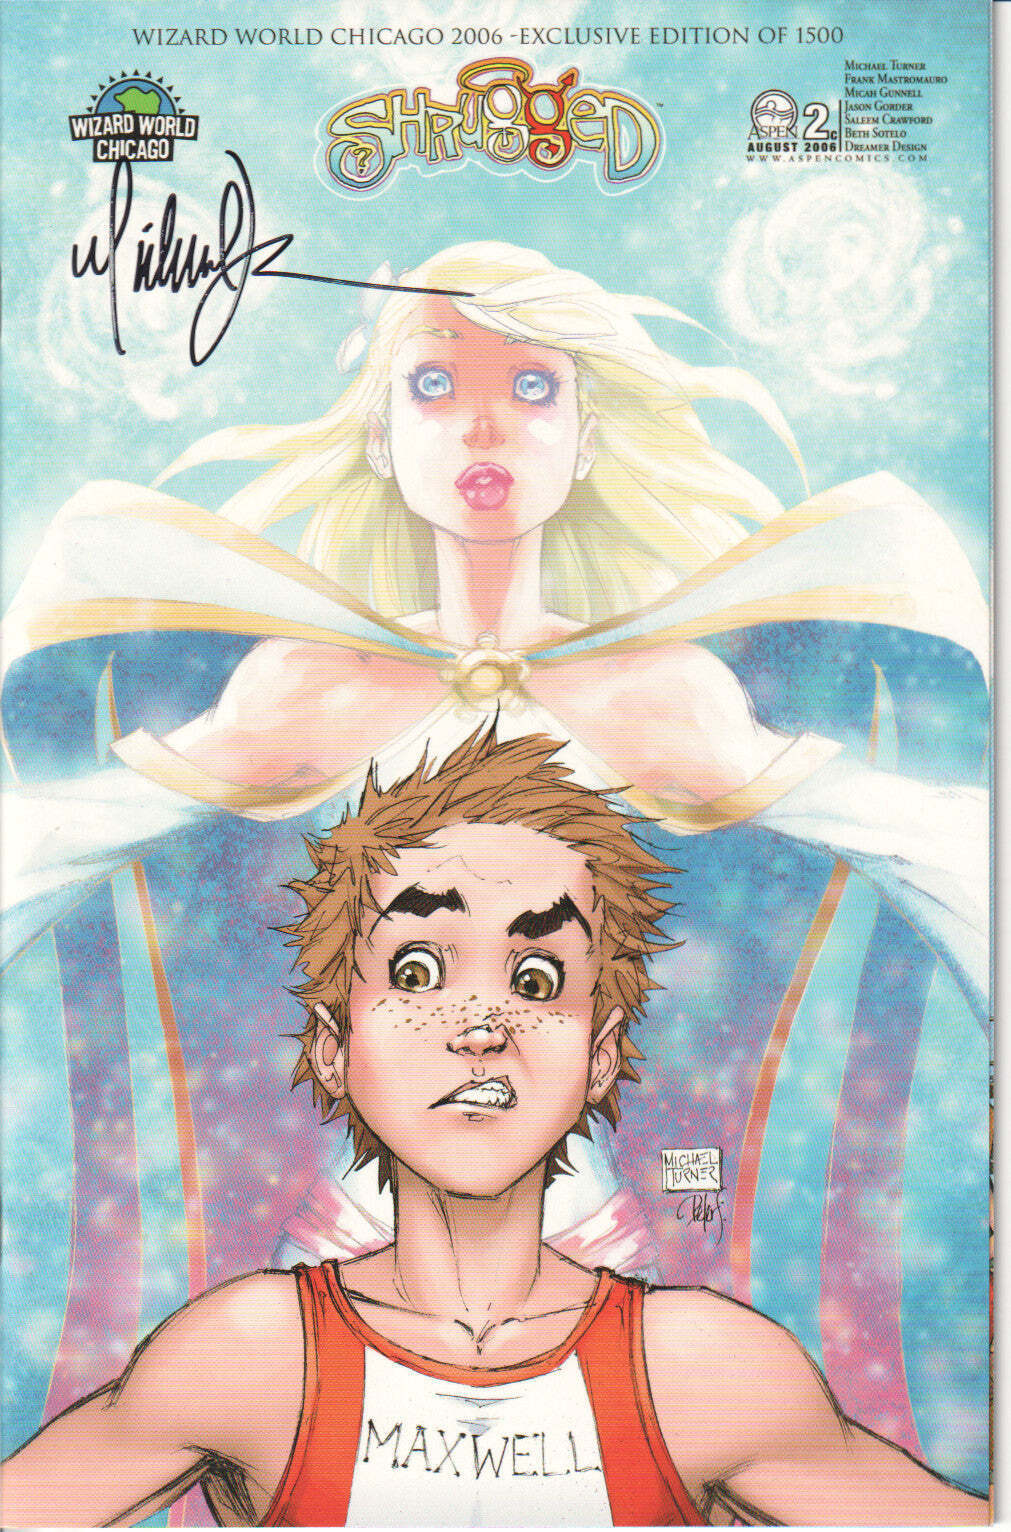 Shrugged #2C 2006 Wizard World Signed by Michael Turner NM+ Limited 1500